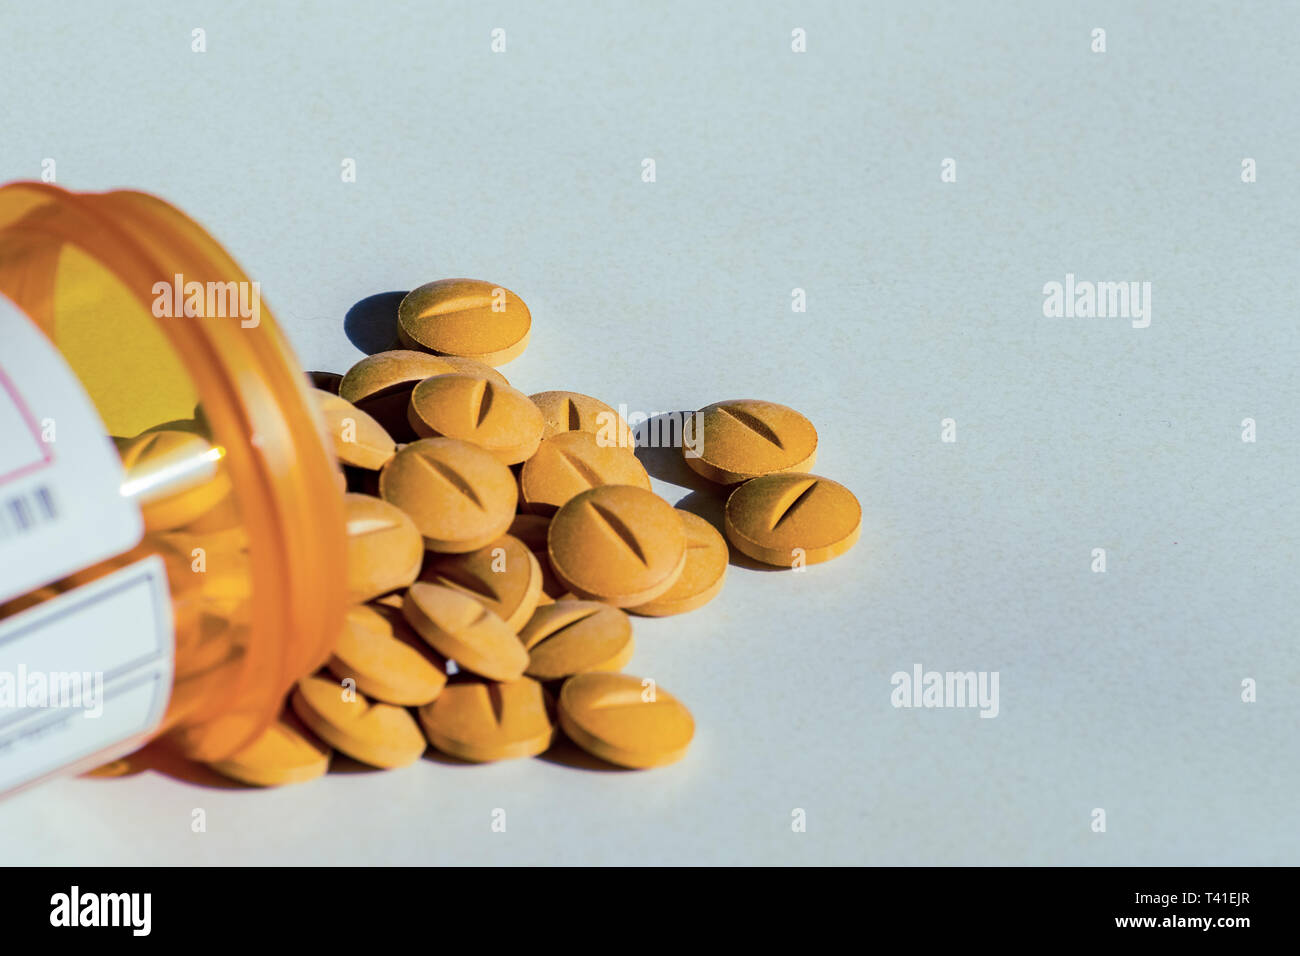 Yellow prescription pills spilled onto a table. Concept of opioid addiction and healthcare industry Stock Photo